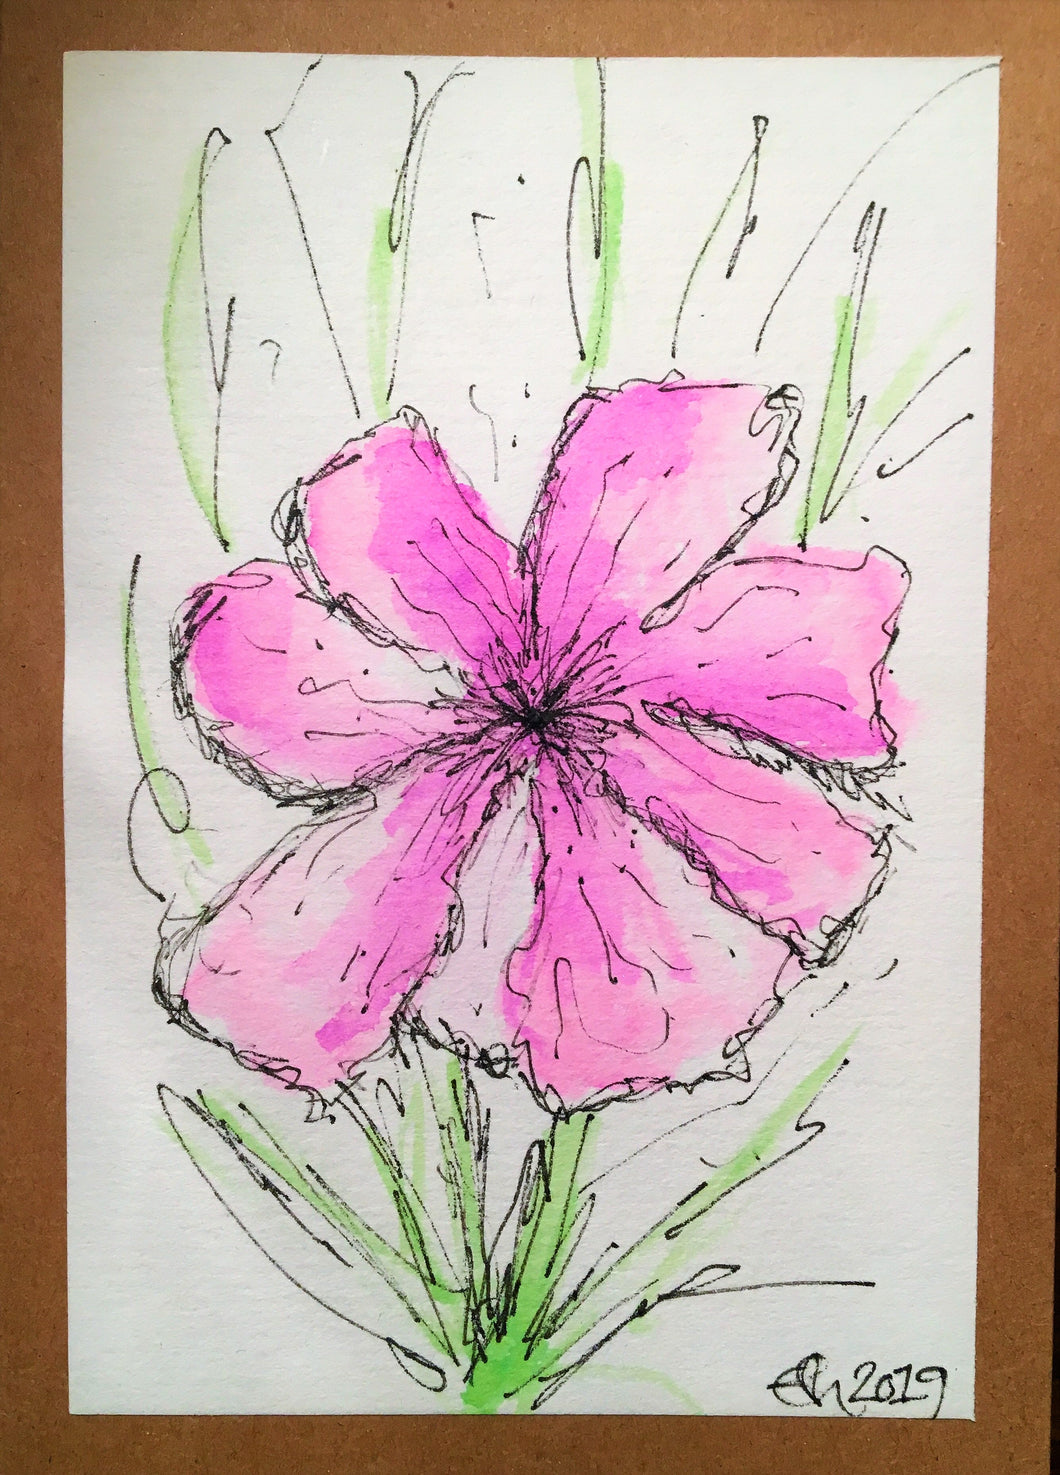 Handpainted Watercolour Greeting Card - Abstract Lilac Flower with Green Design - eDgE dEsiGn London